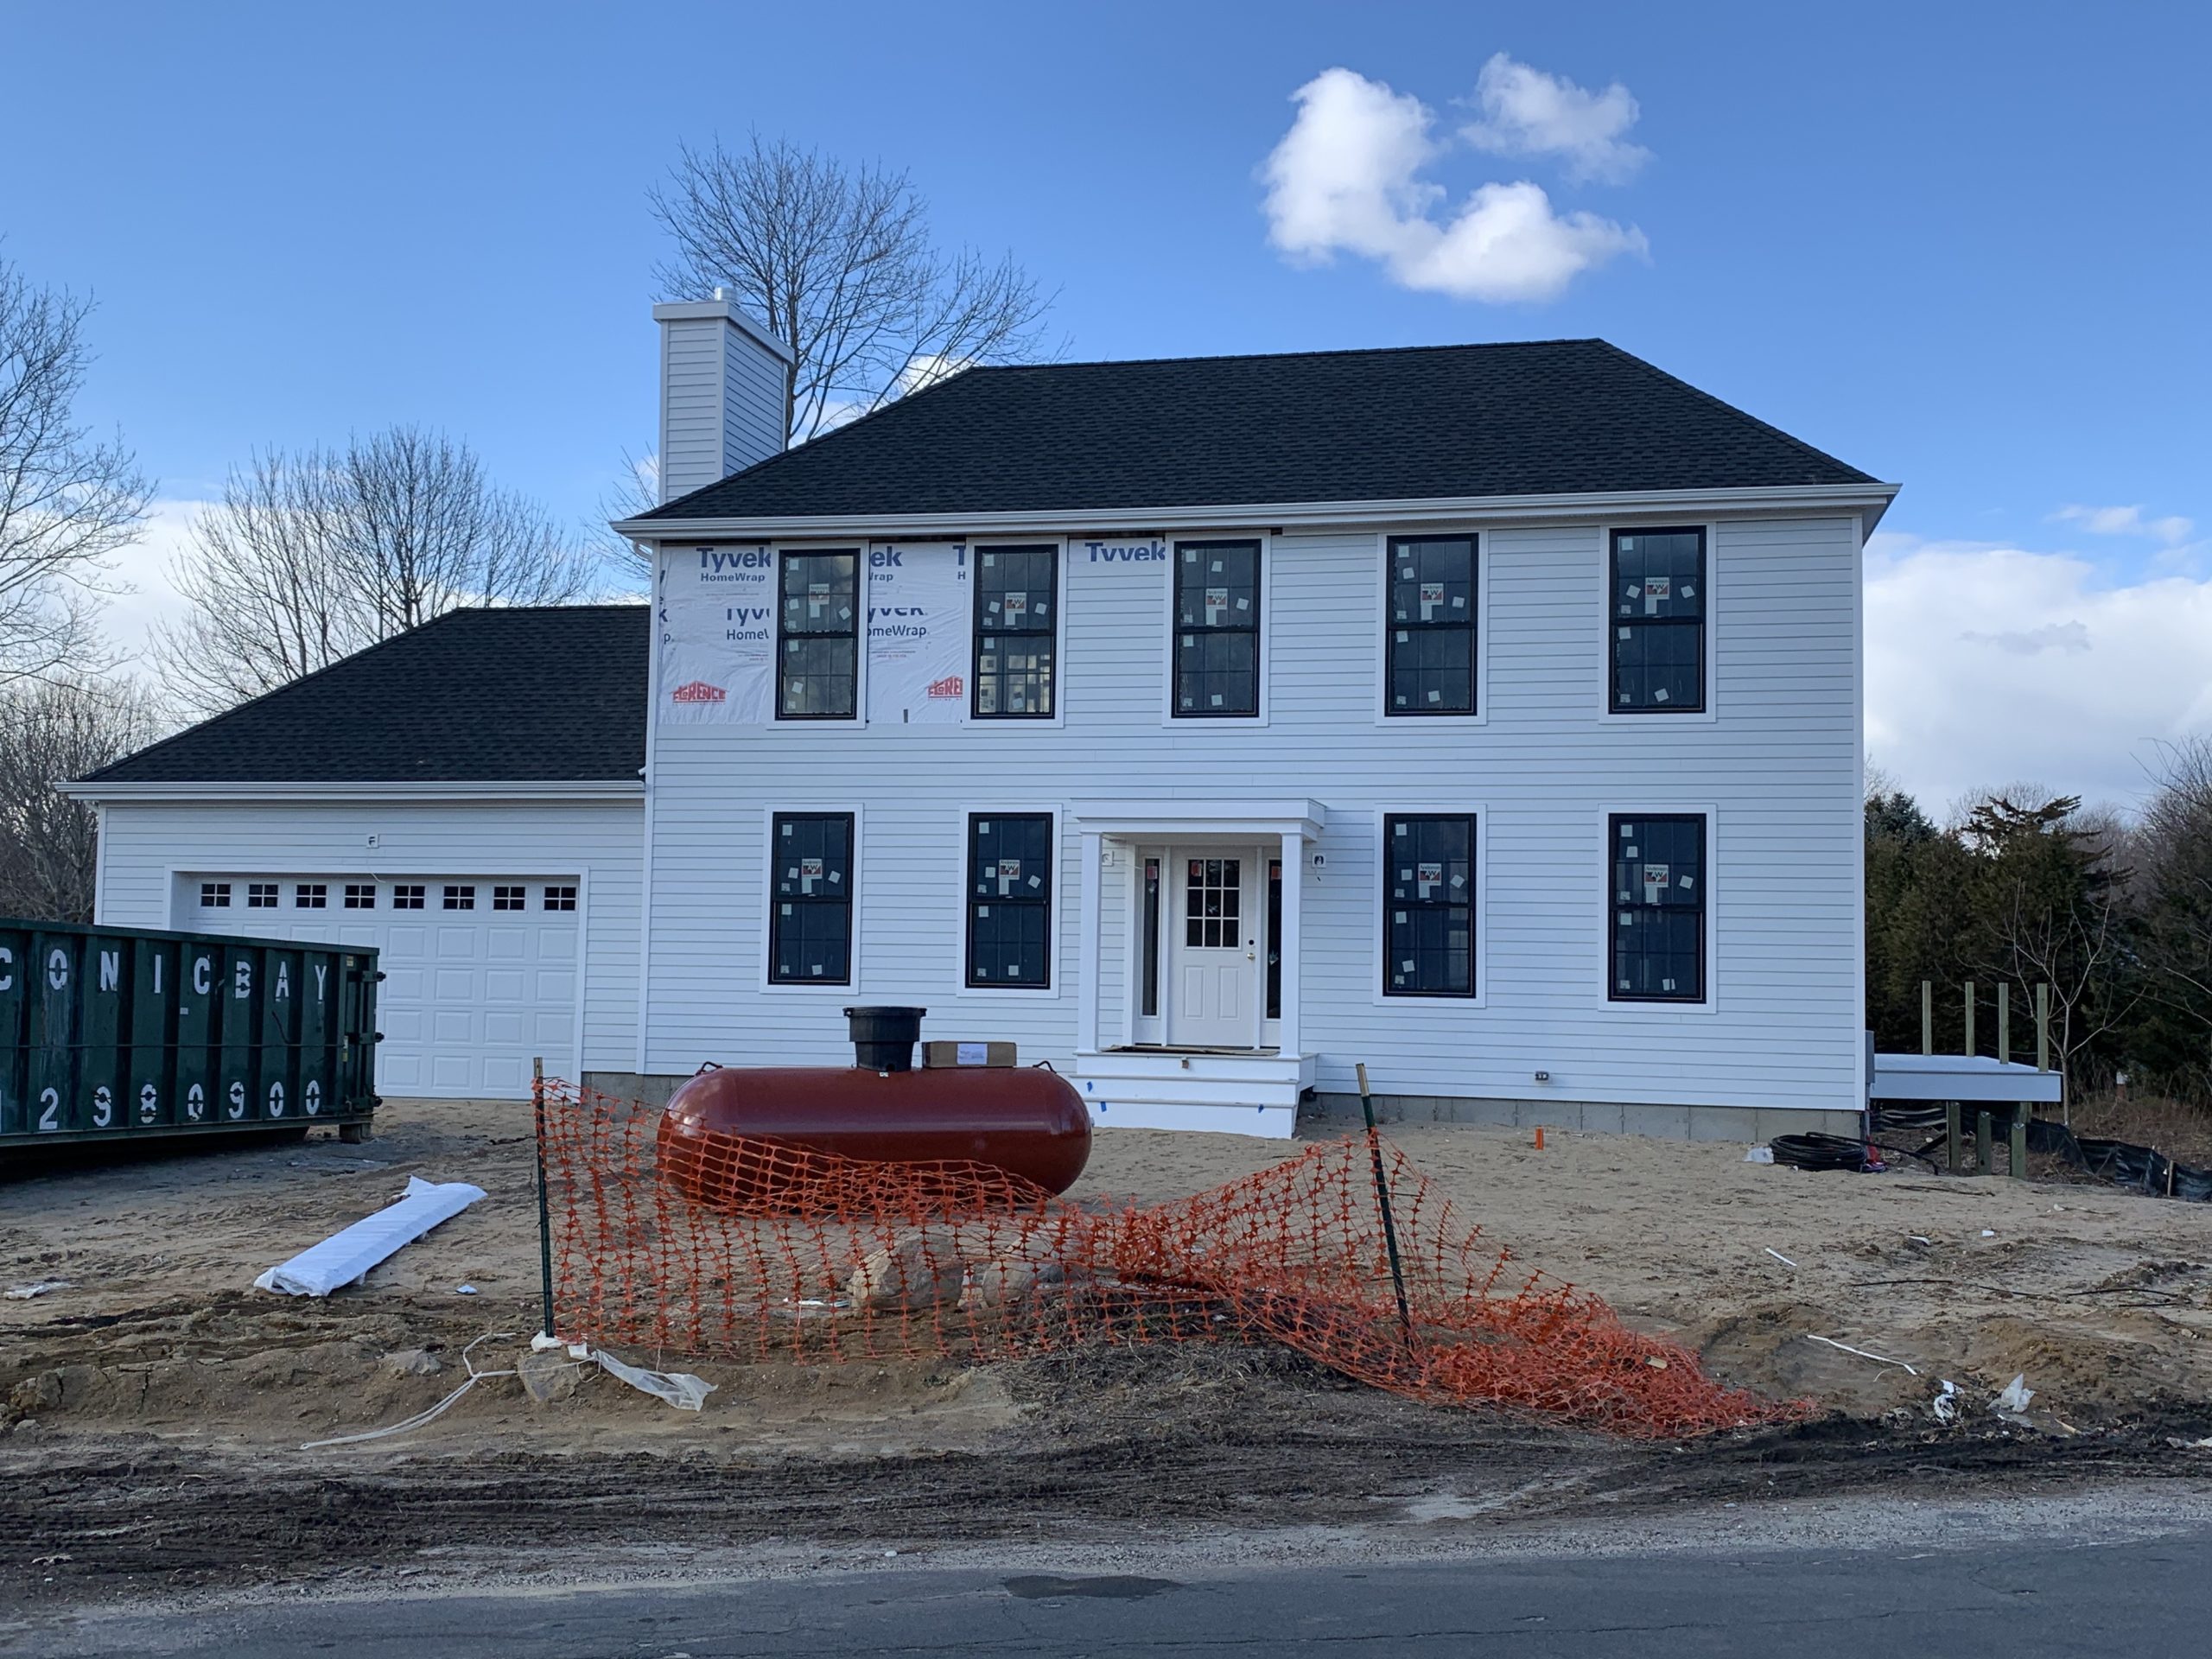 A new house under construction in Cutchogue.